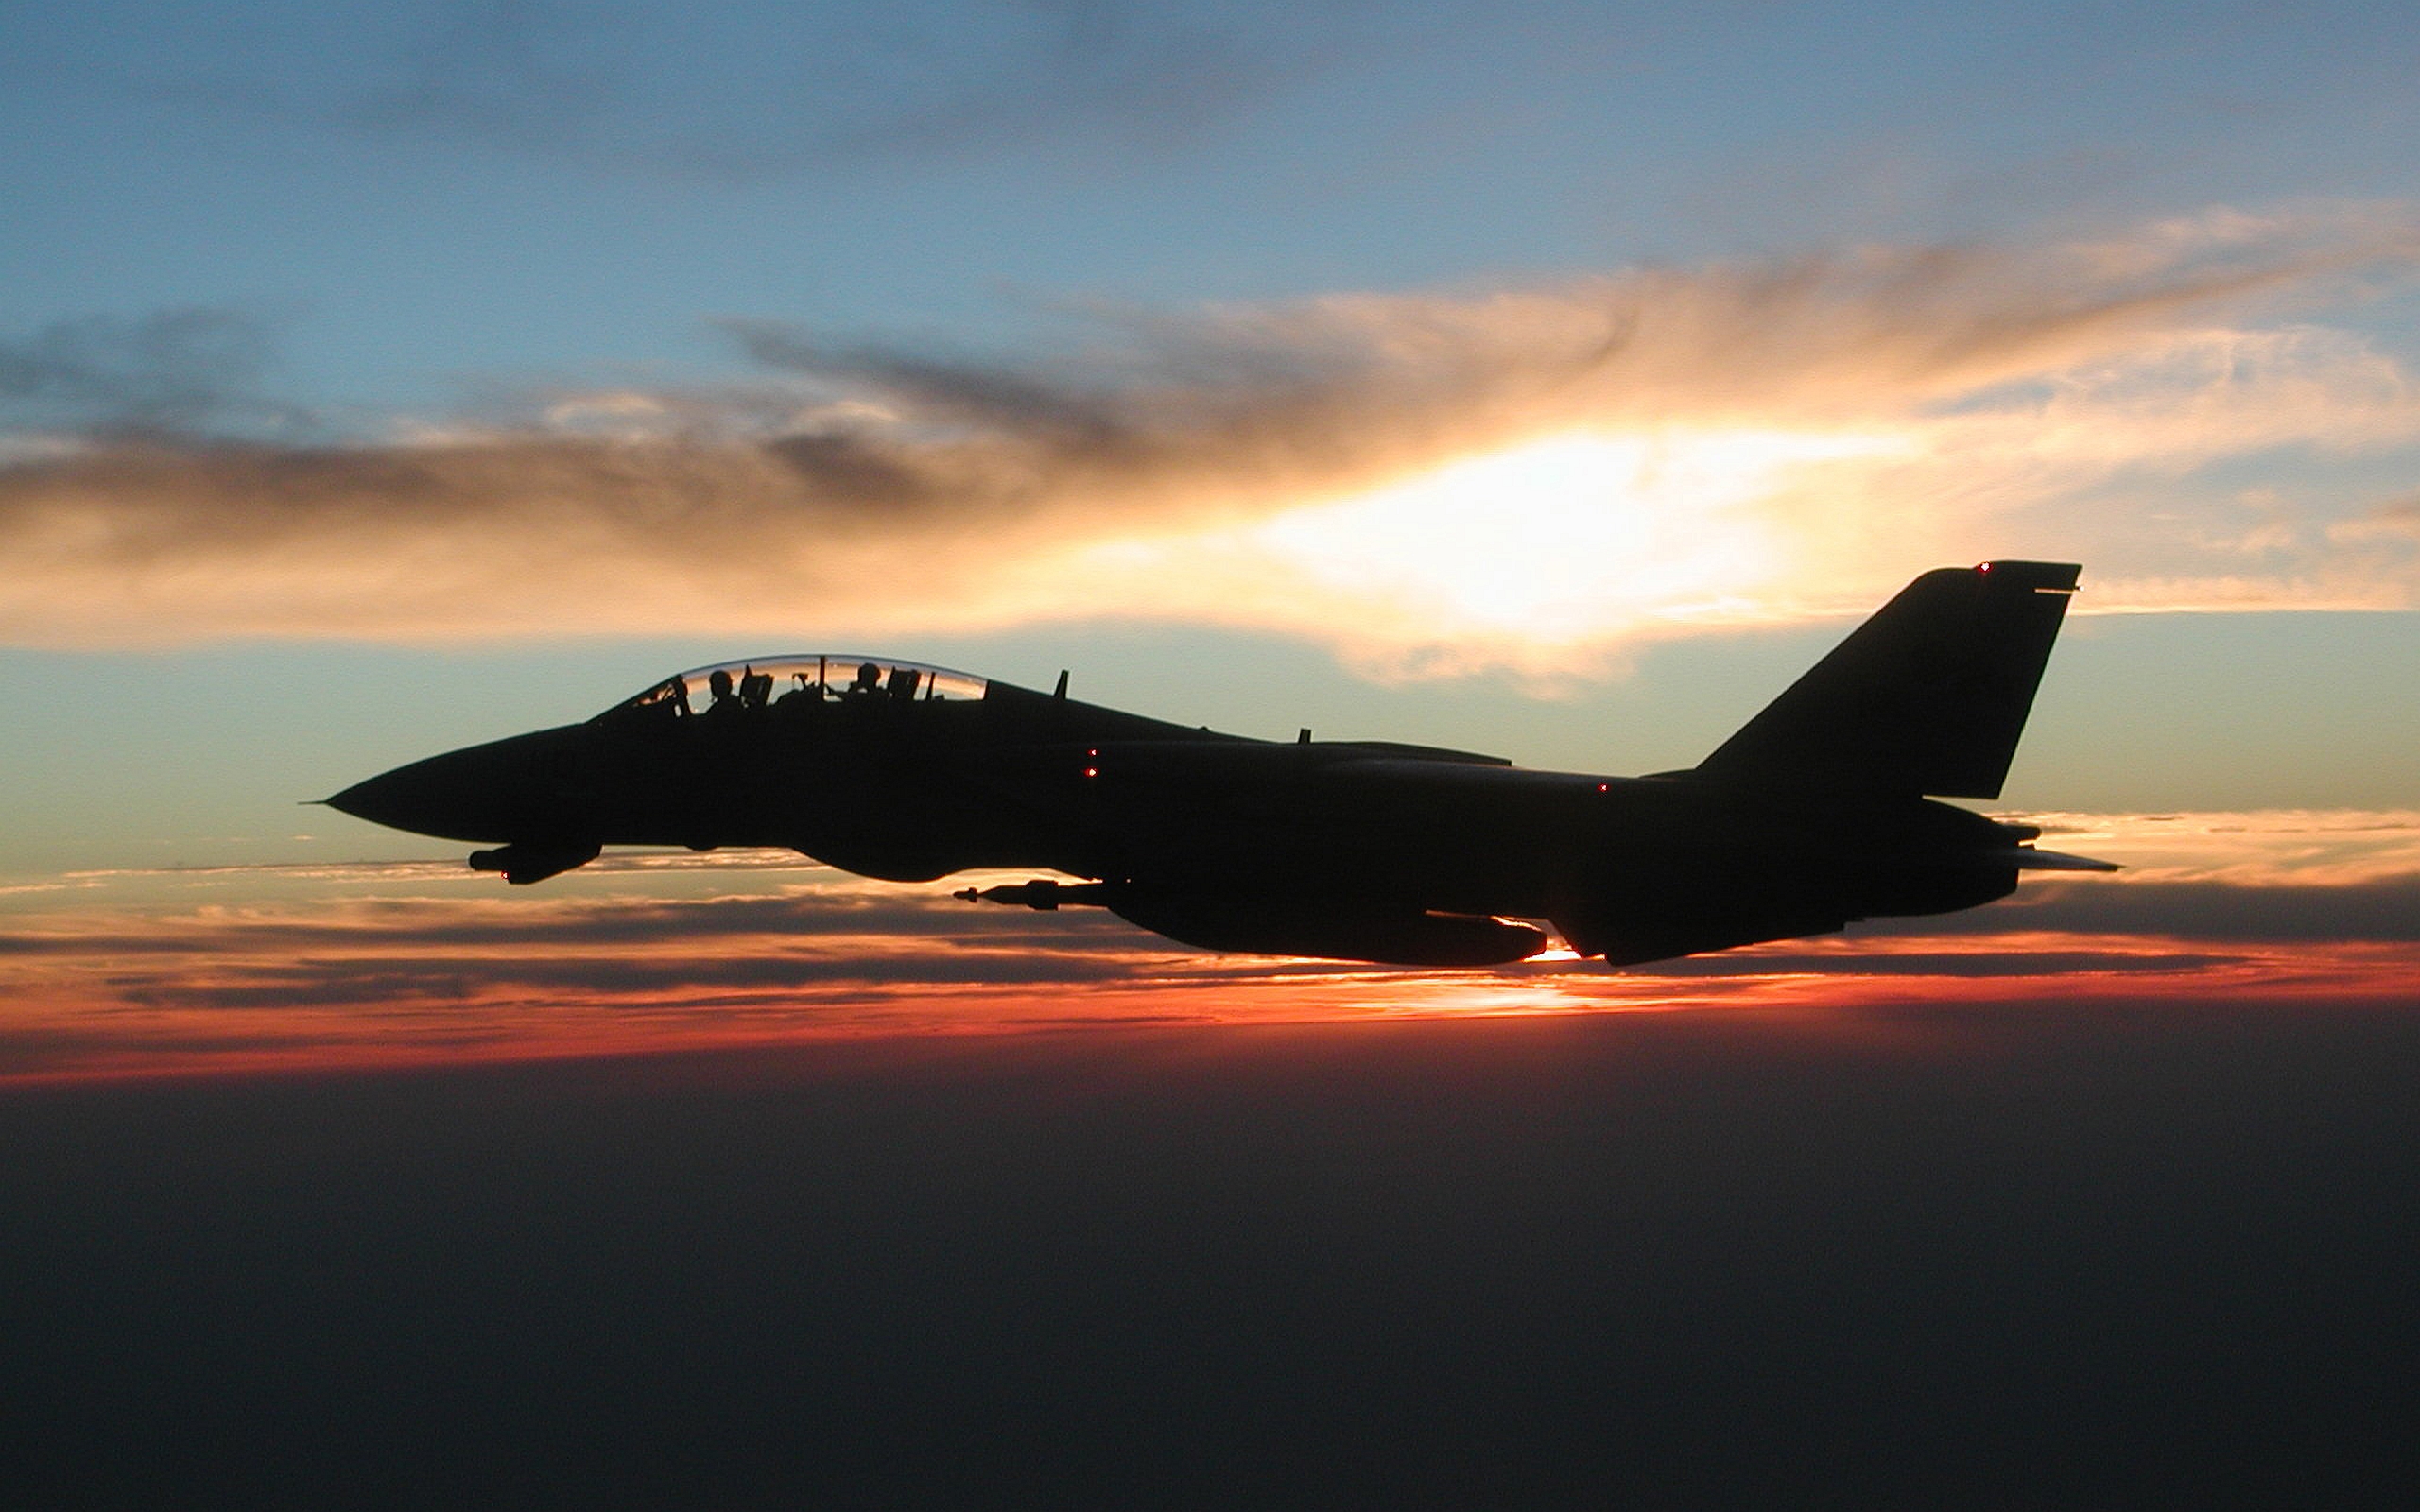 40+ Grumman F-14 Tomcat HD Wallpapers and Backgrounds